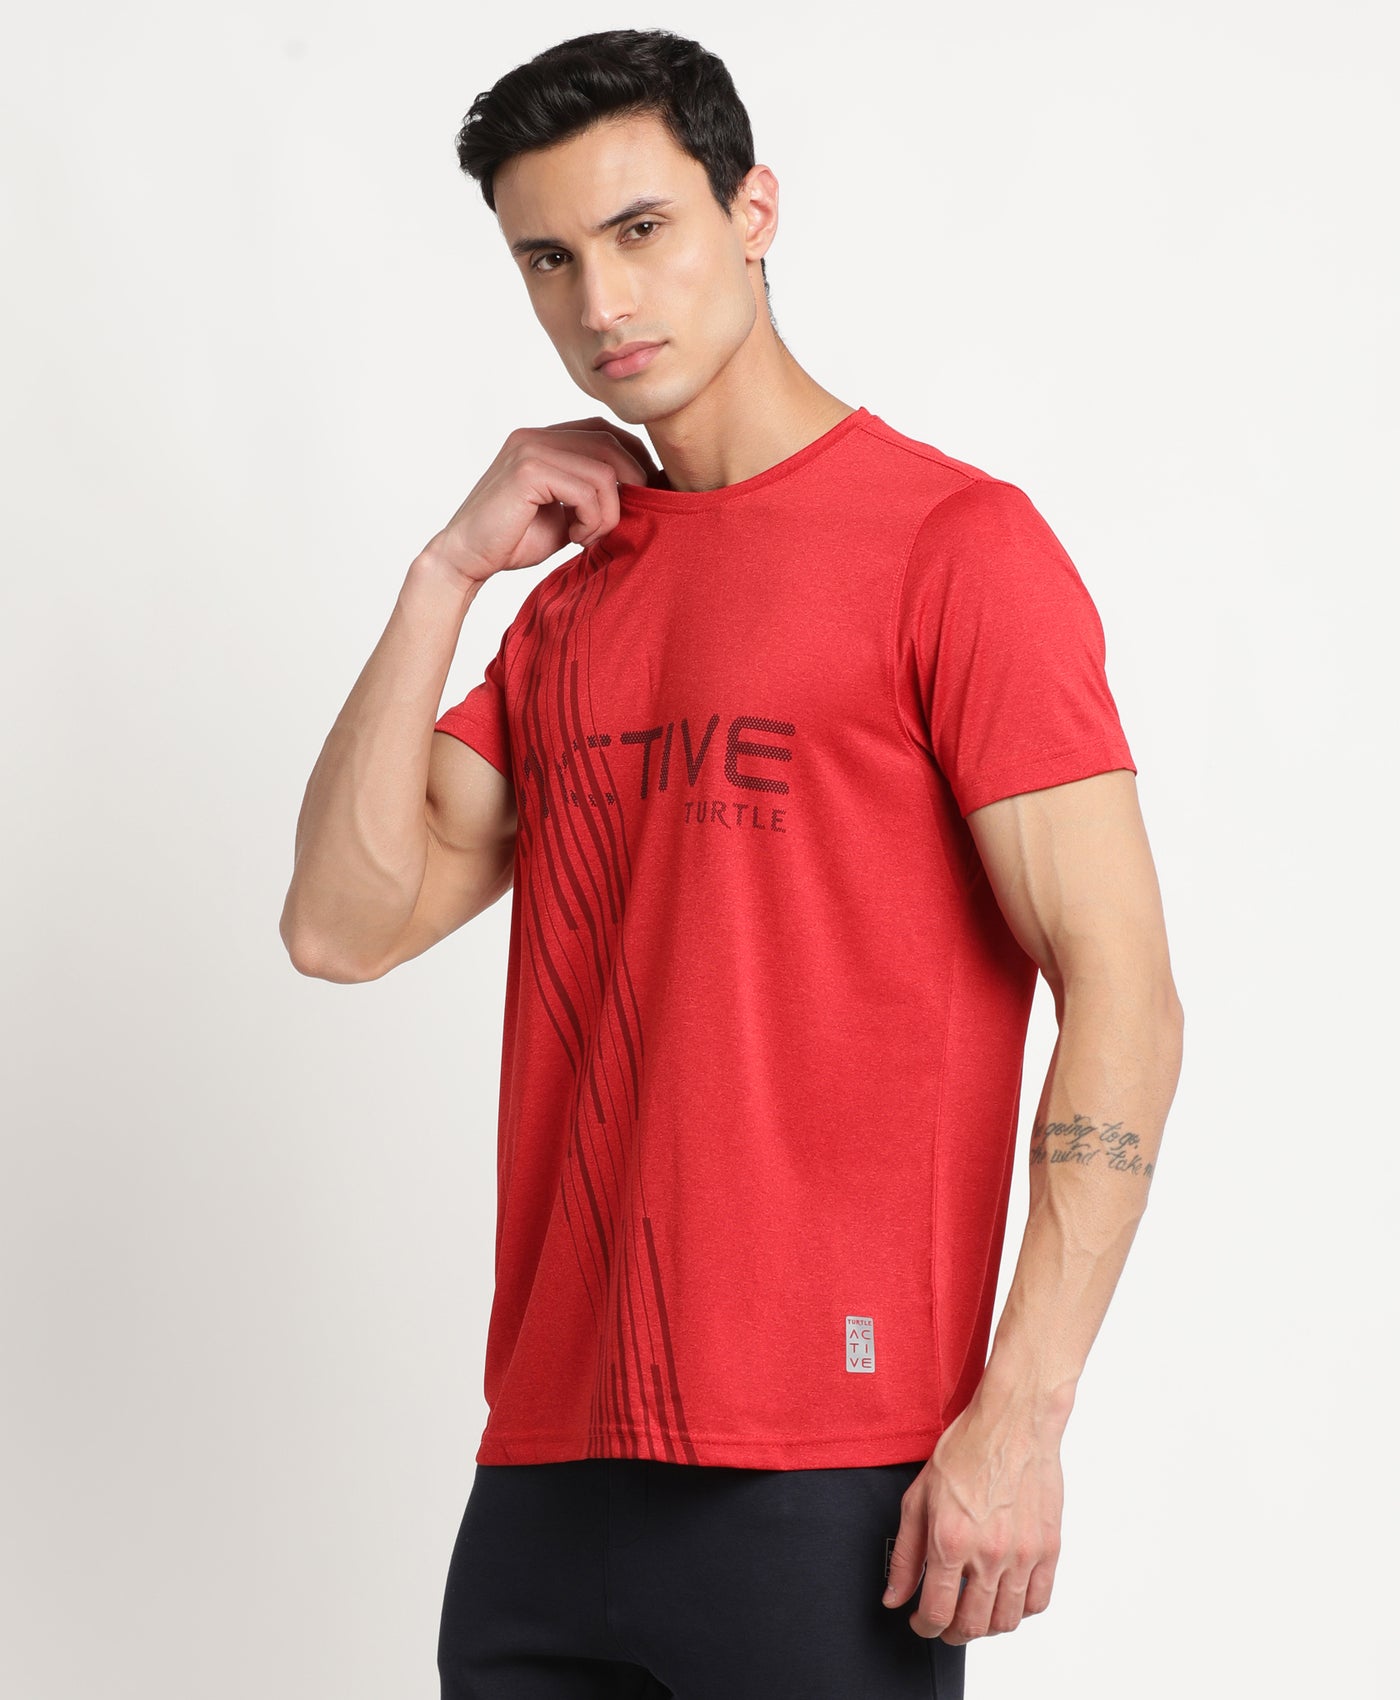 Polyester Red Printed Crew Neck Half Sleeve Active T-Shirt